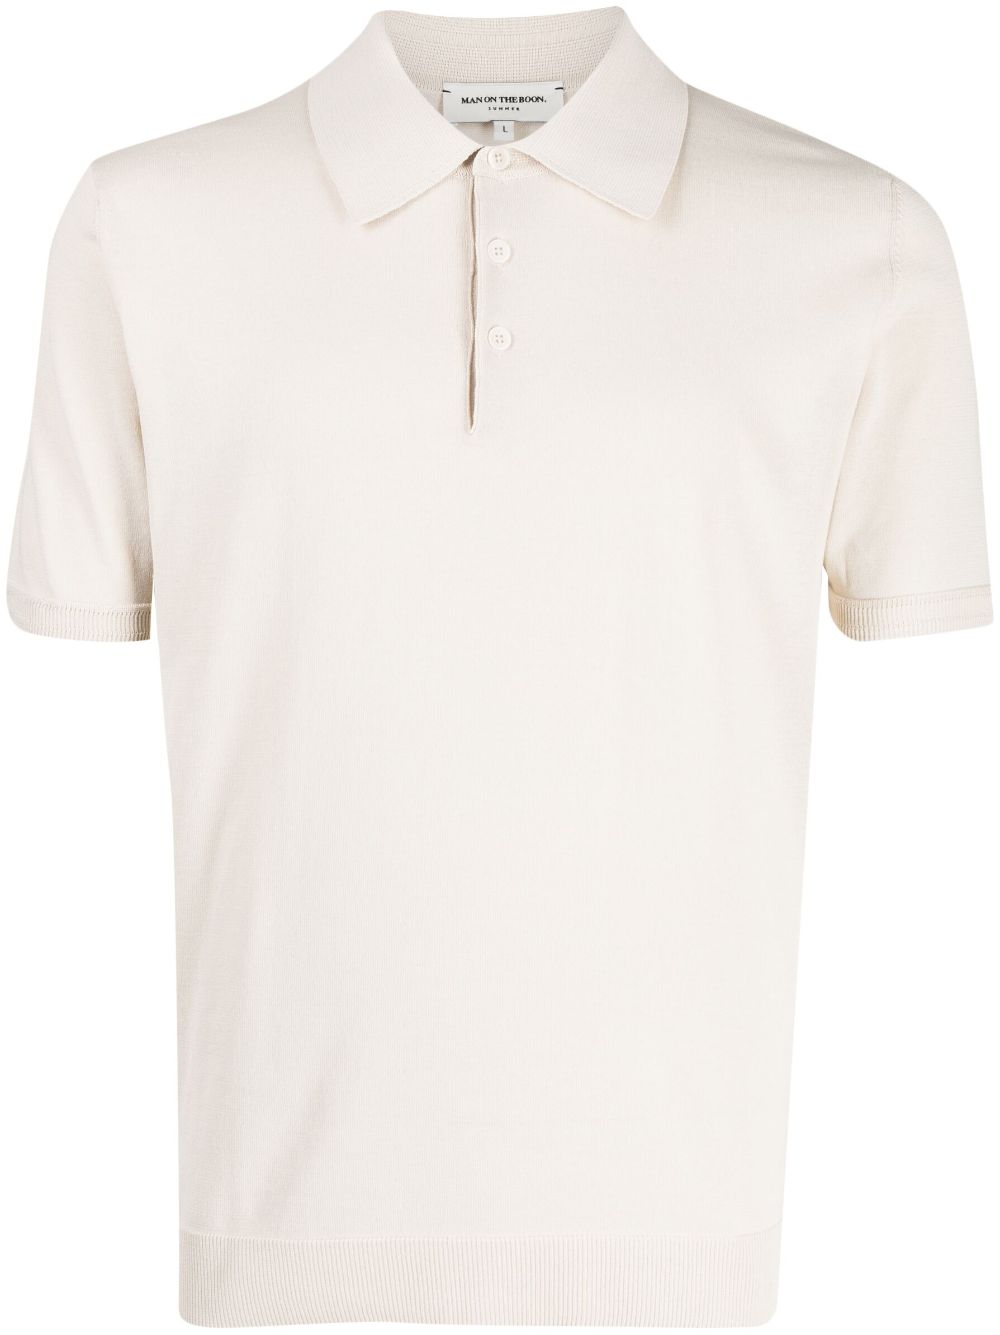 Man On The Boon. Short-sleeve Knitted Polo Shirt In White